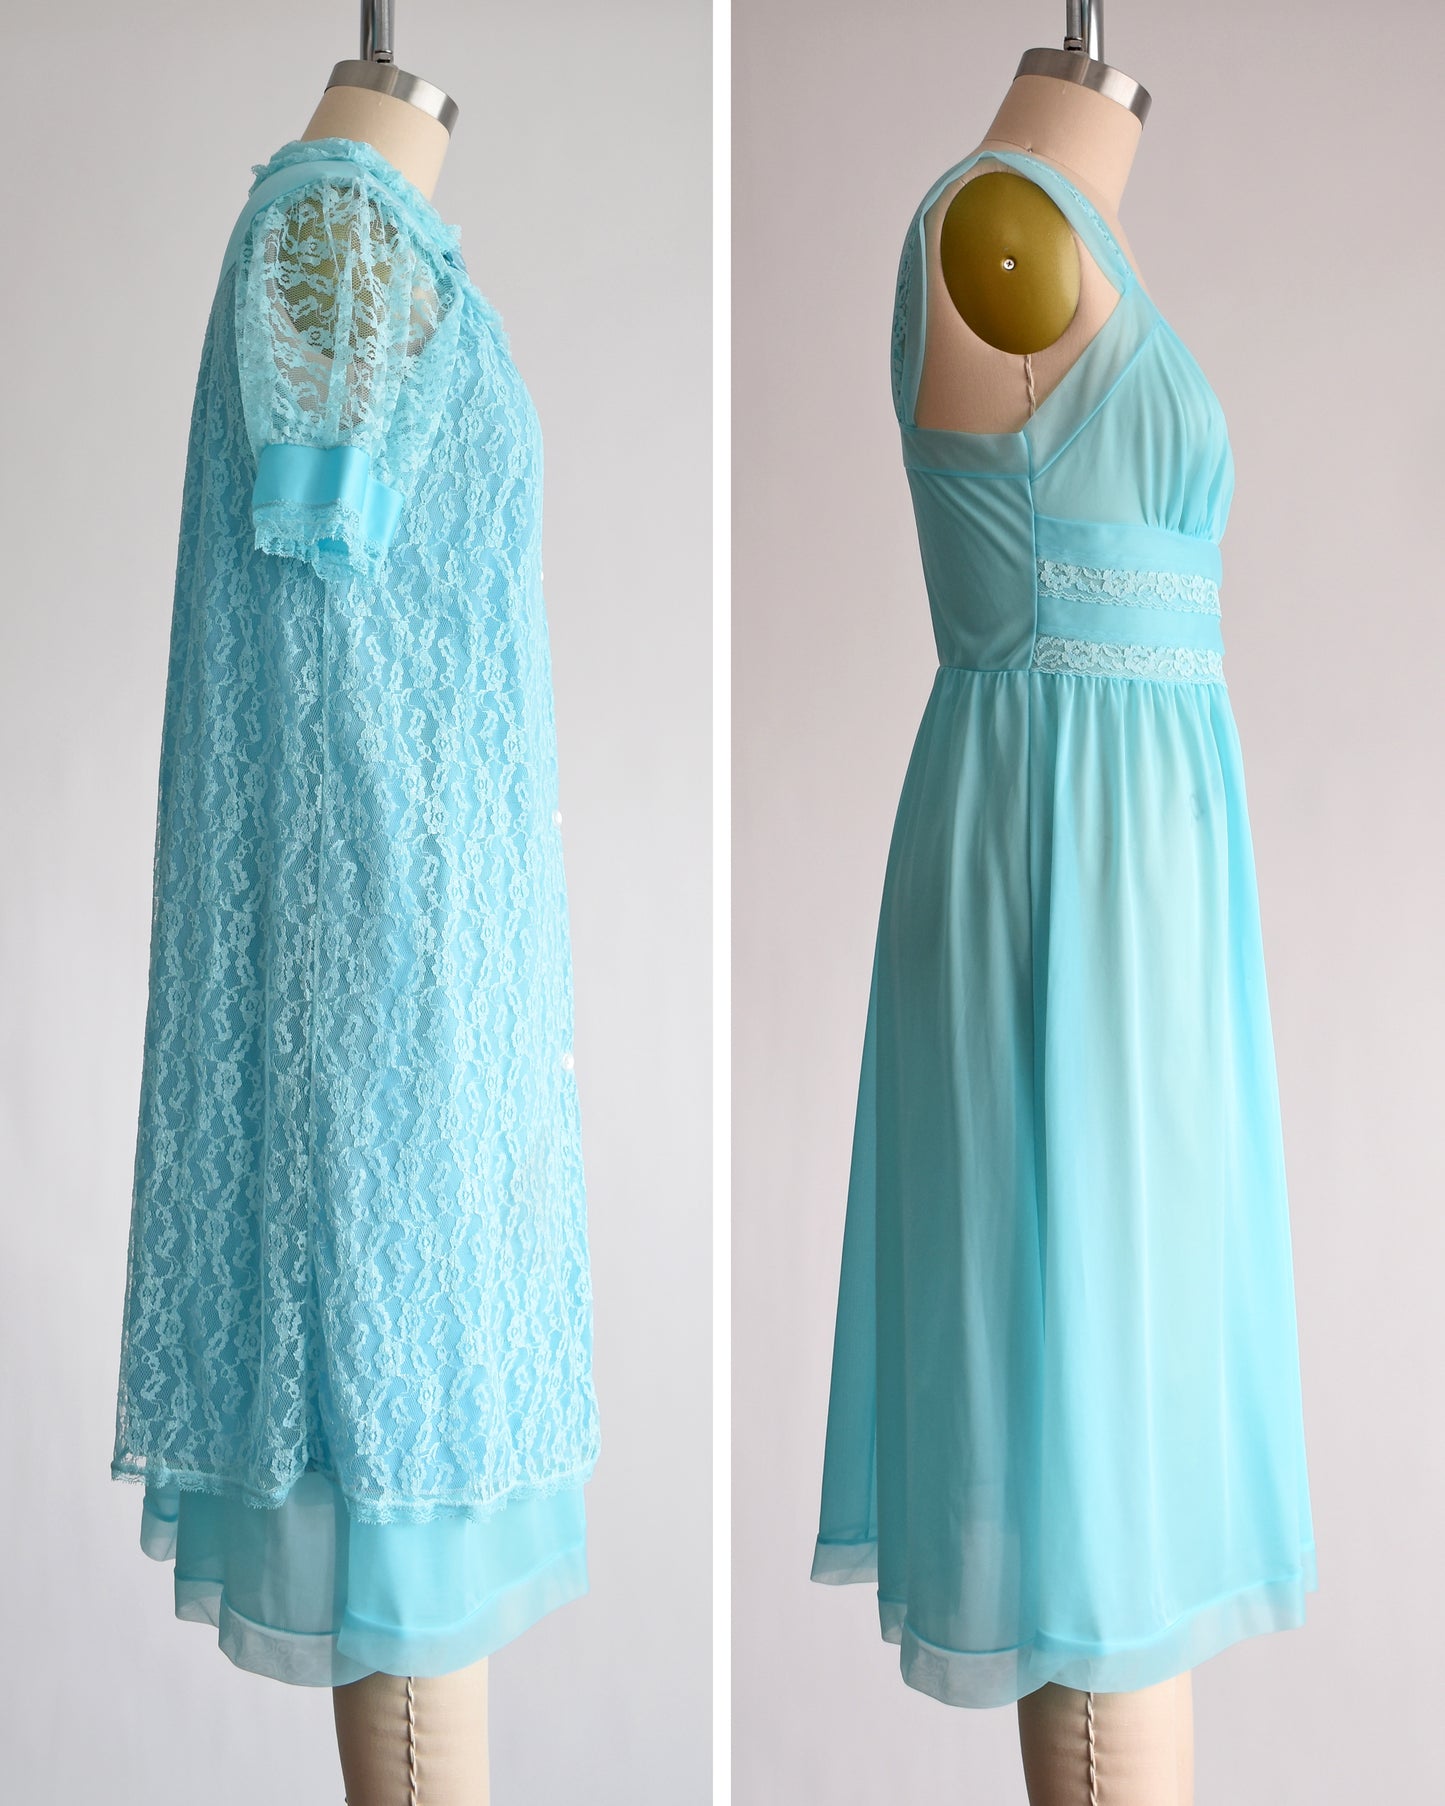 Side by side views of a A vintage 1960s aqua blue peignoir set that comes with a lace robe and matching nightgown. The left shows the robe and the right only shows the nightgown